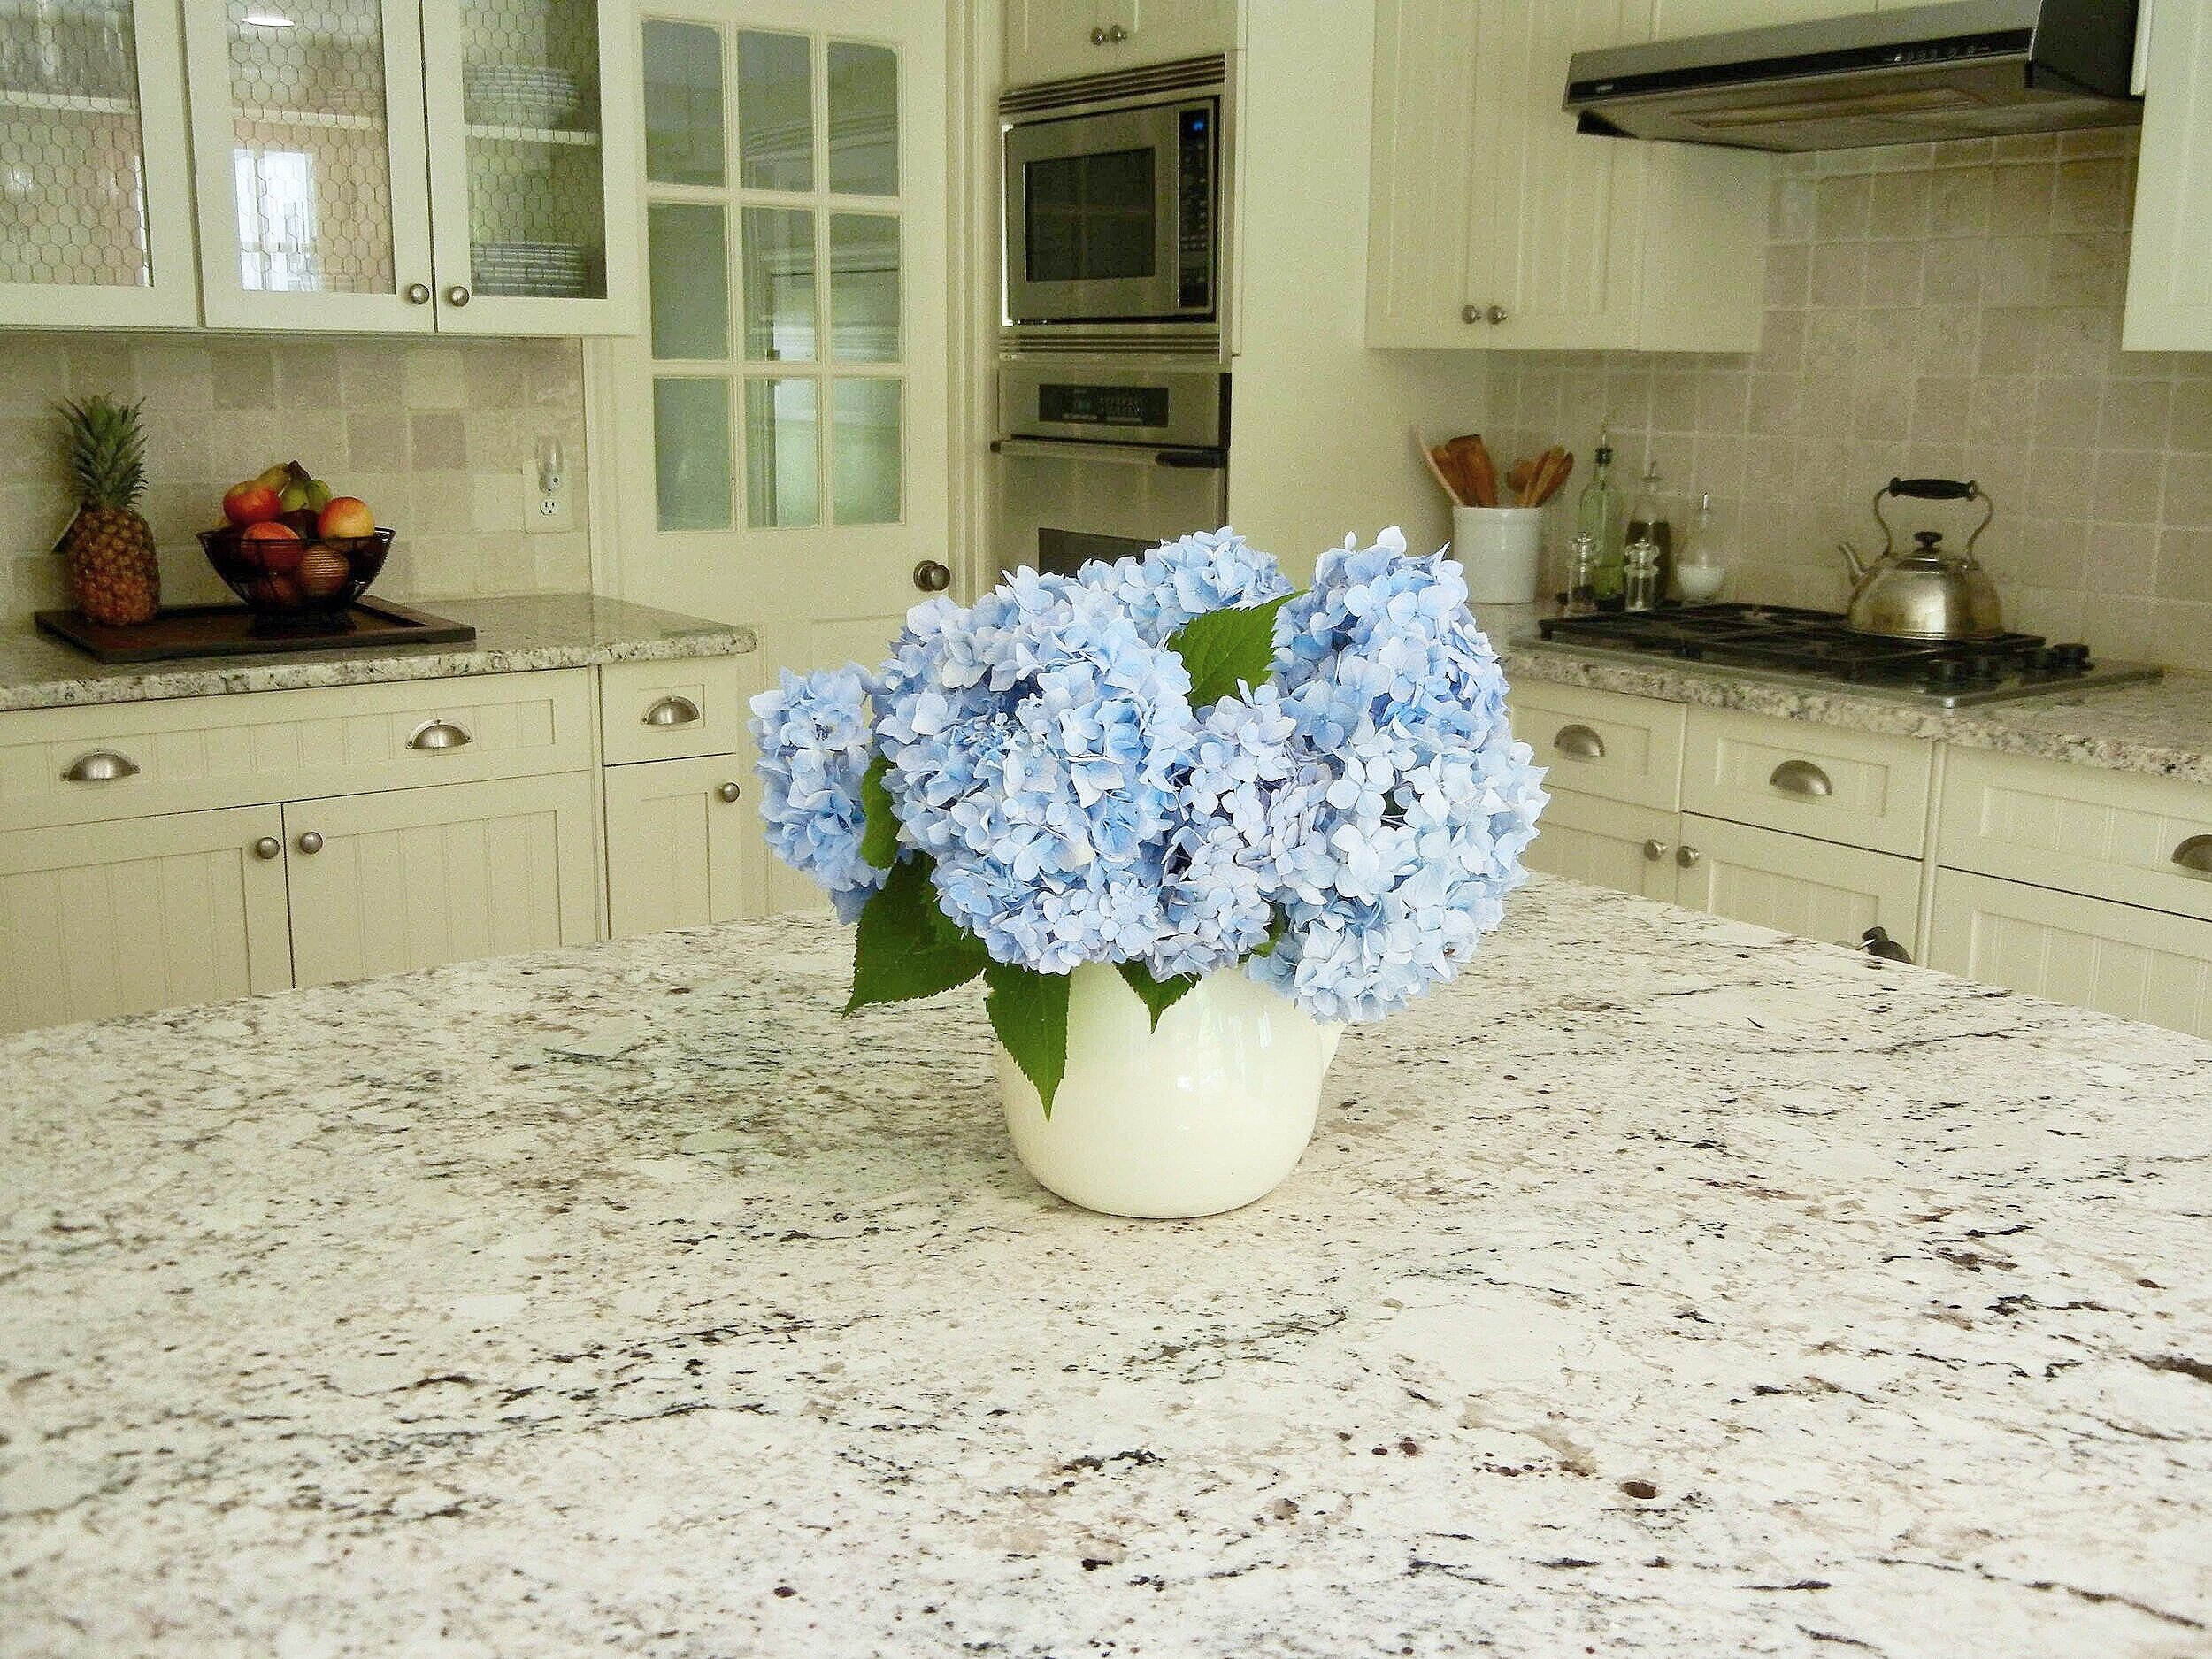 Move AFTER - Clear Counters &amp; Fresh Flowers before Dinner